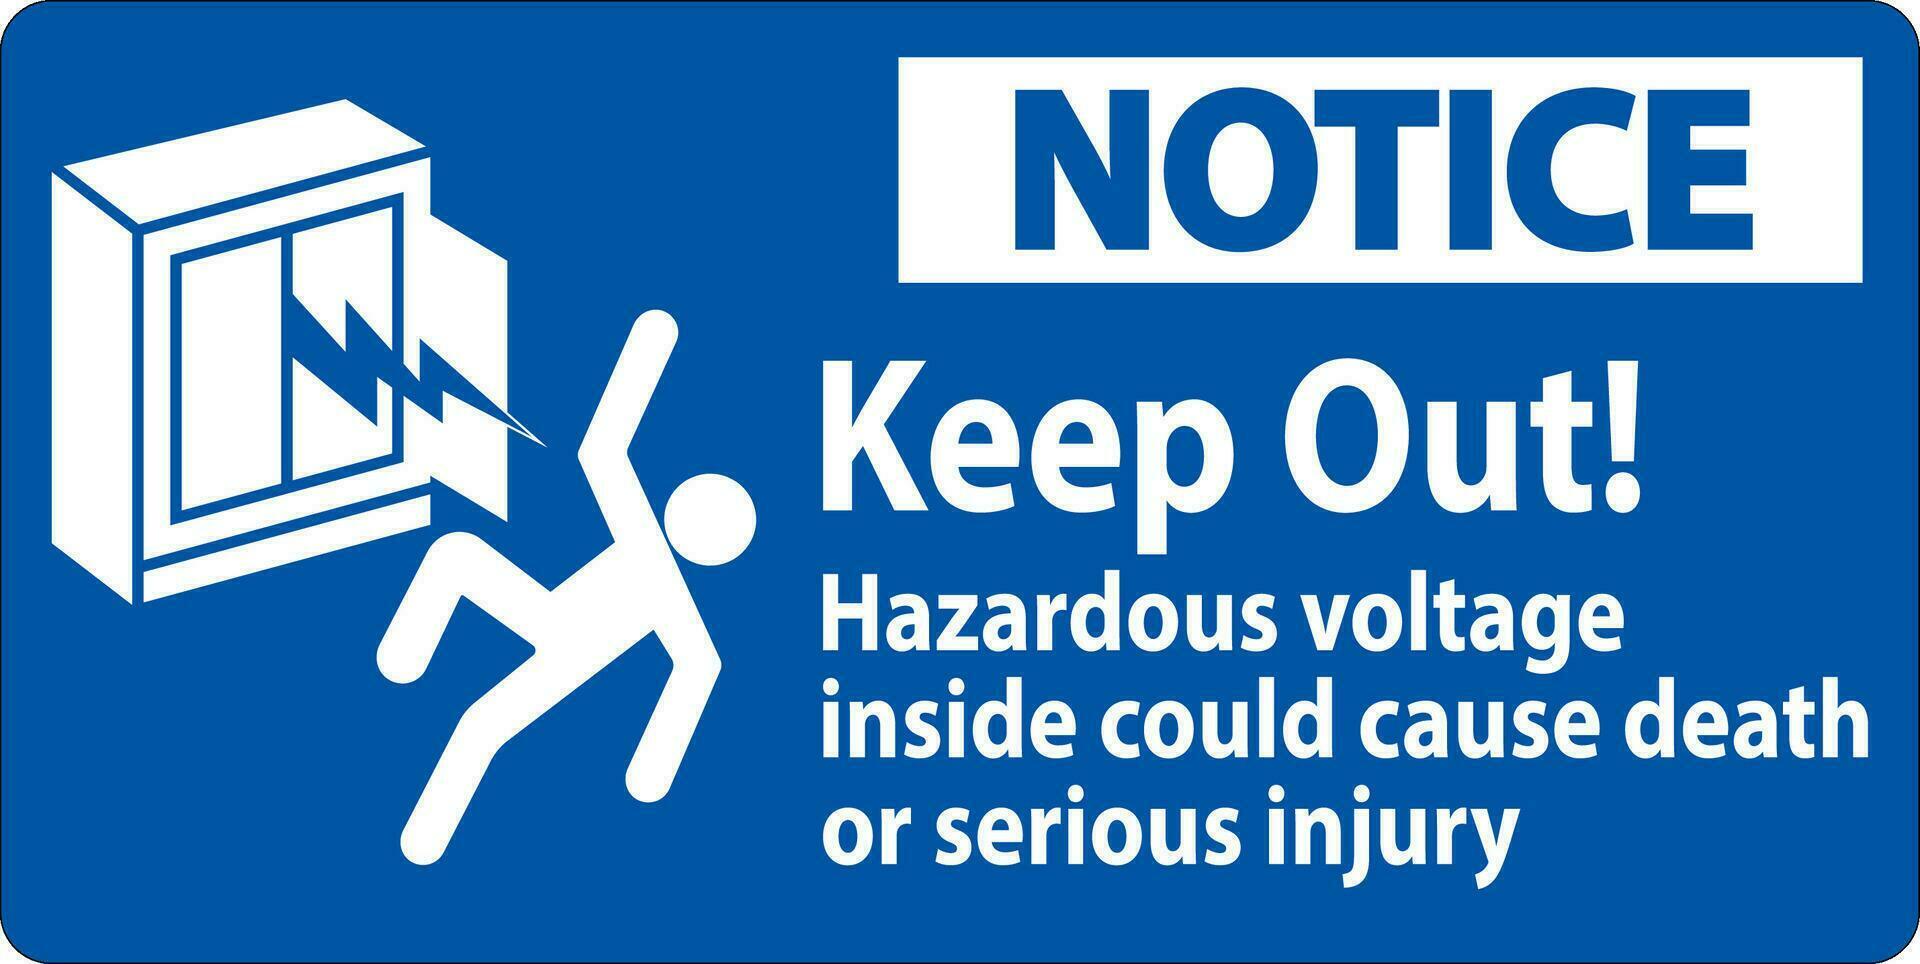 Notice Sign Keep Out Hazardous Voltage Inside, Could Cause Death Or Serious Injury vector